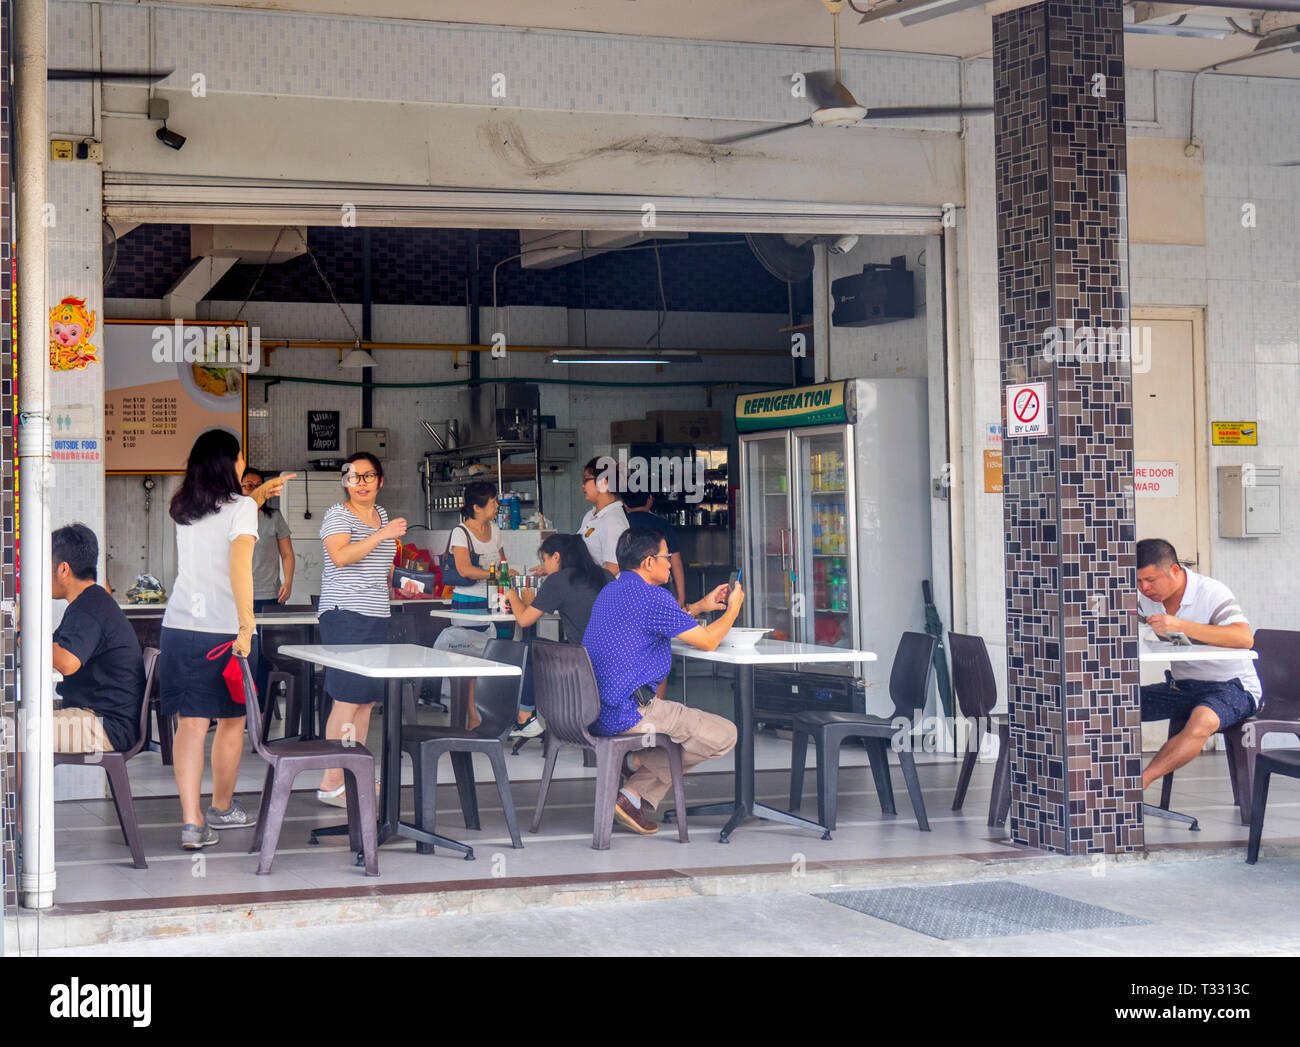 Locals eating at restaurant in Choo Chiat Singapore. Stock Photo